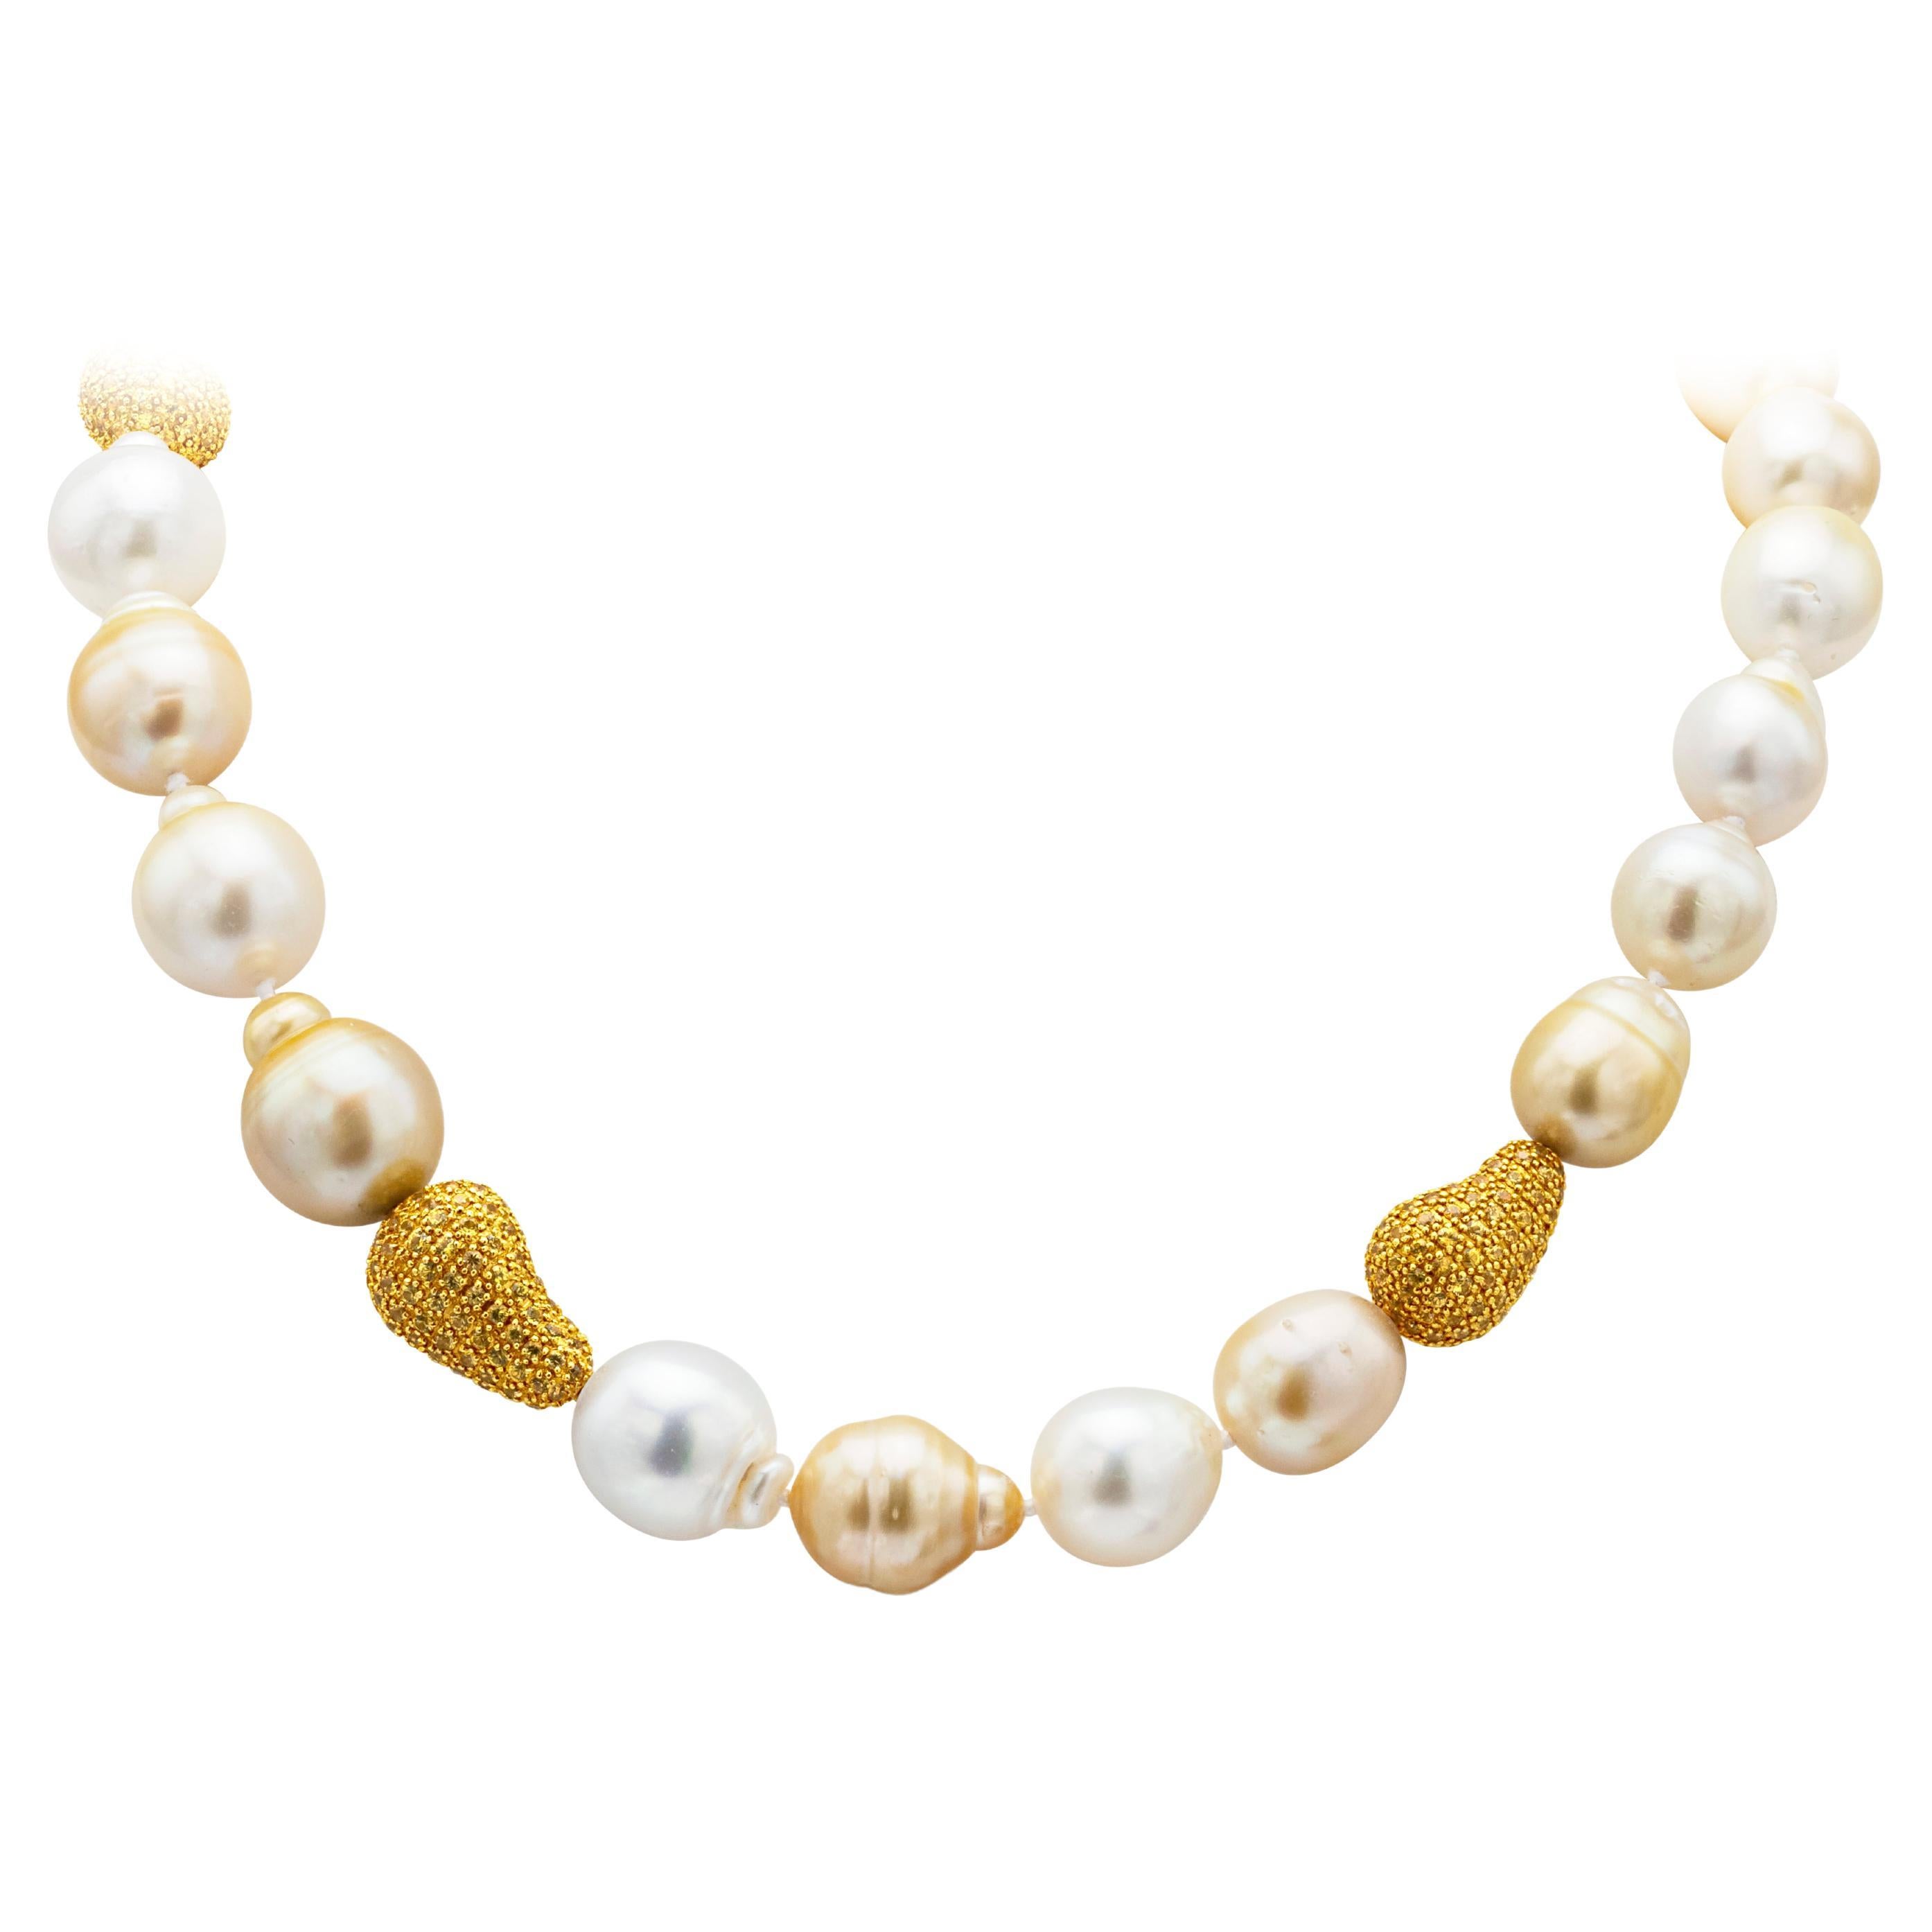 Golden and White South Sea Baroque Pearls and Yellow Sapphire Necklace